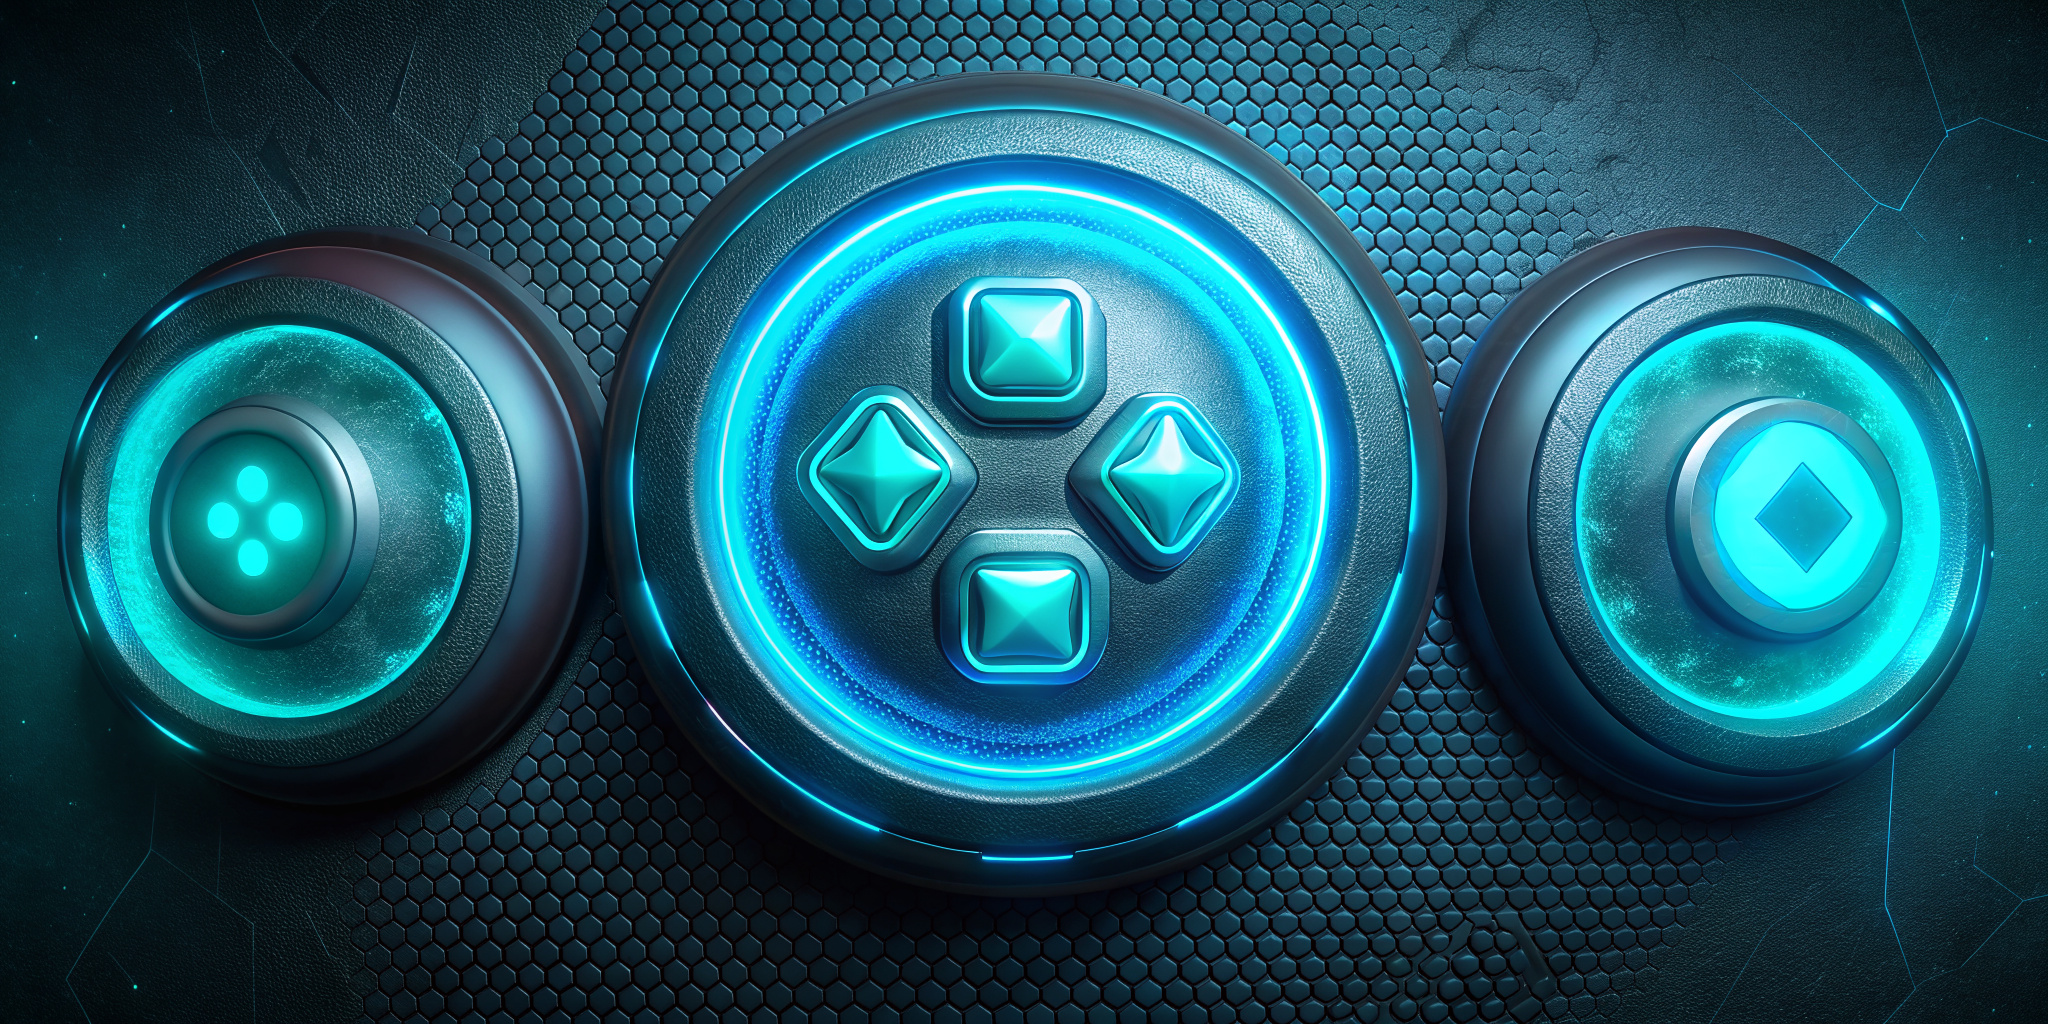 bbuttons for video game cyberpunk style , neon turquoise glow 